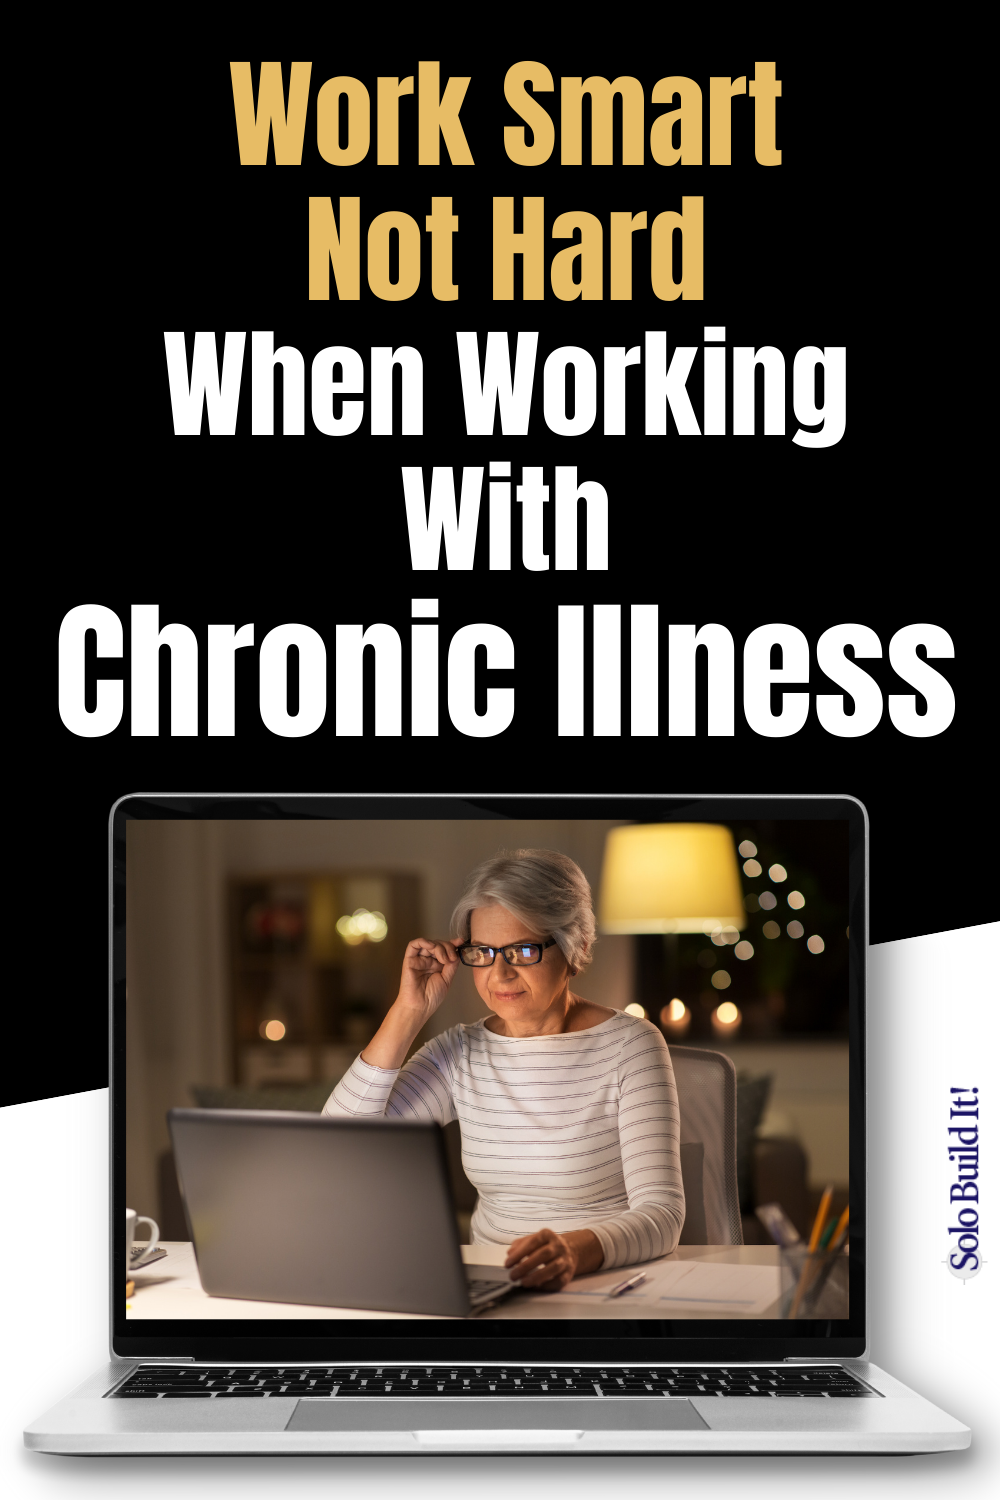 Working From Home With Chronic Illness: 10 Proven Tips